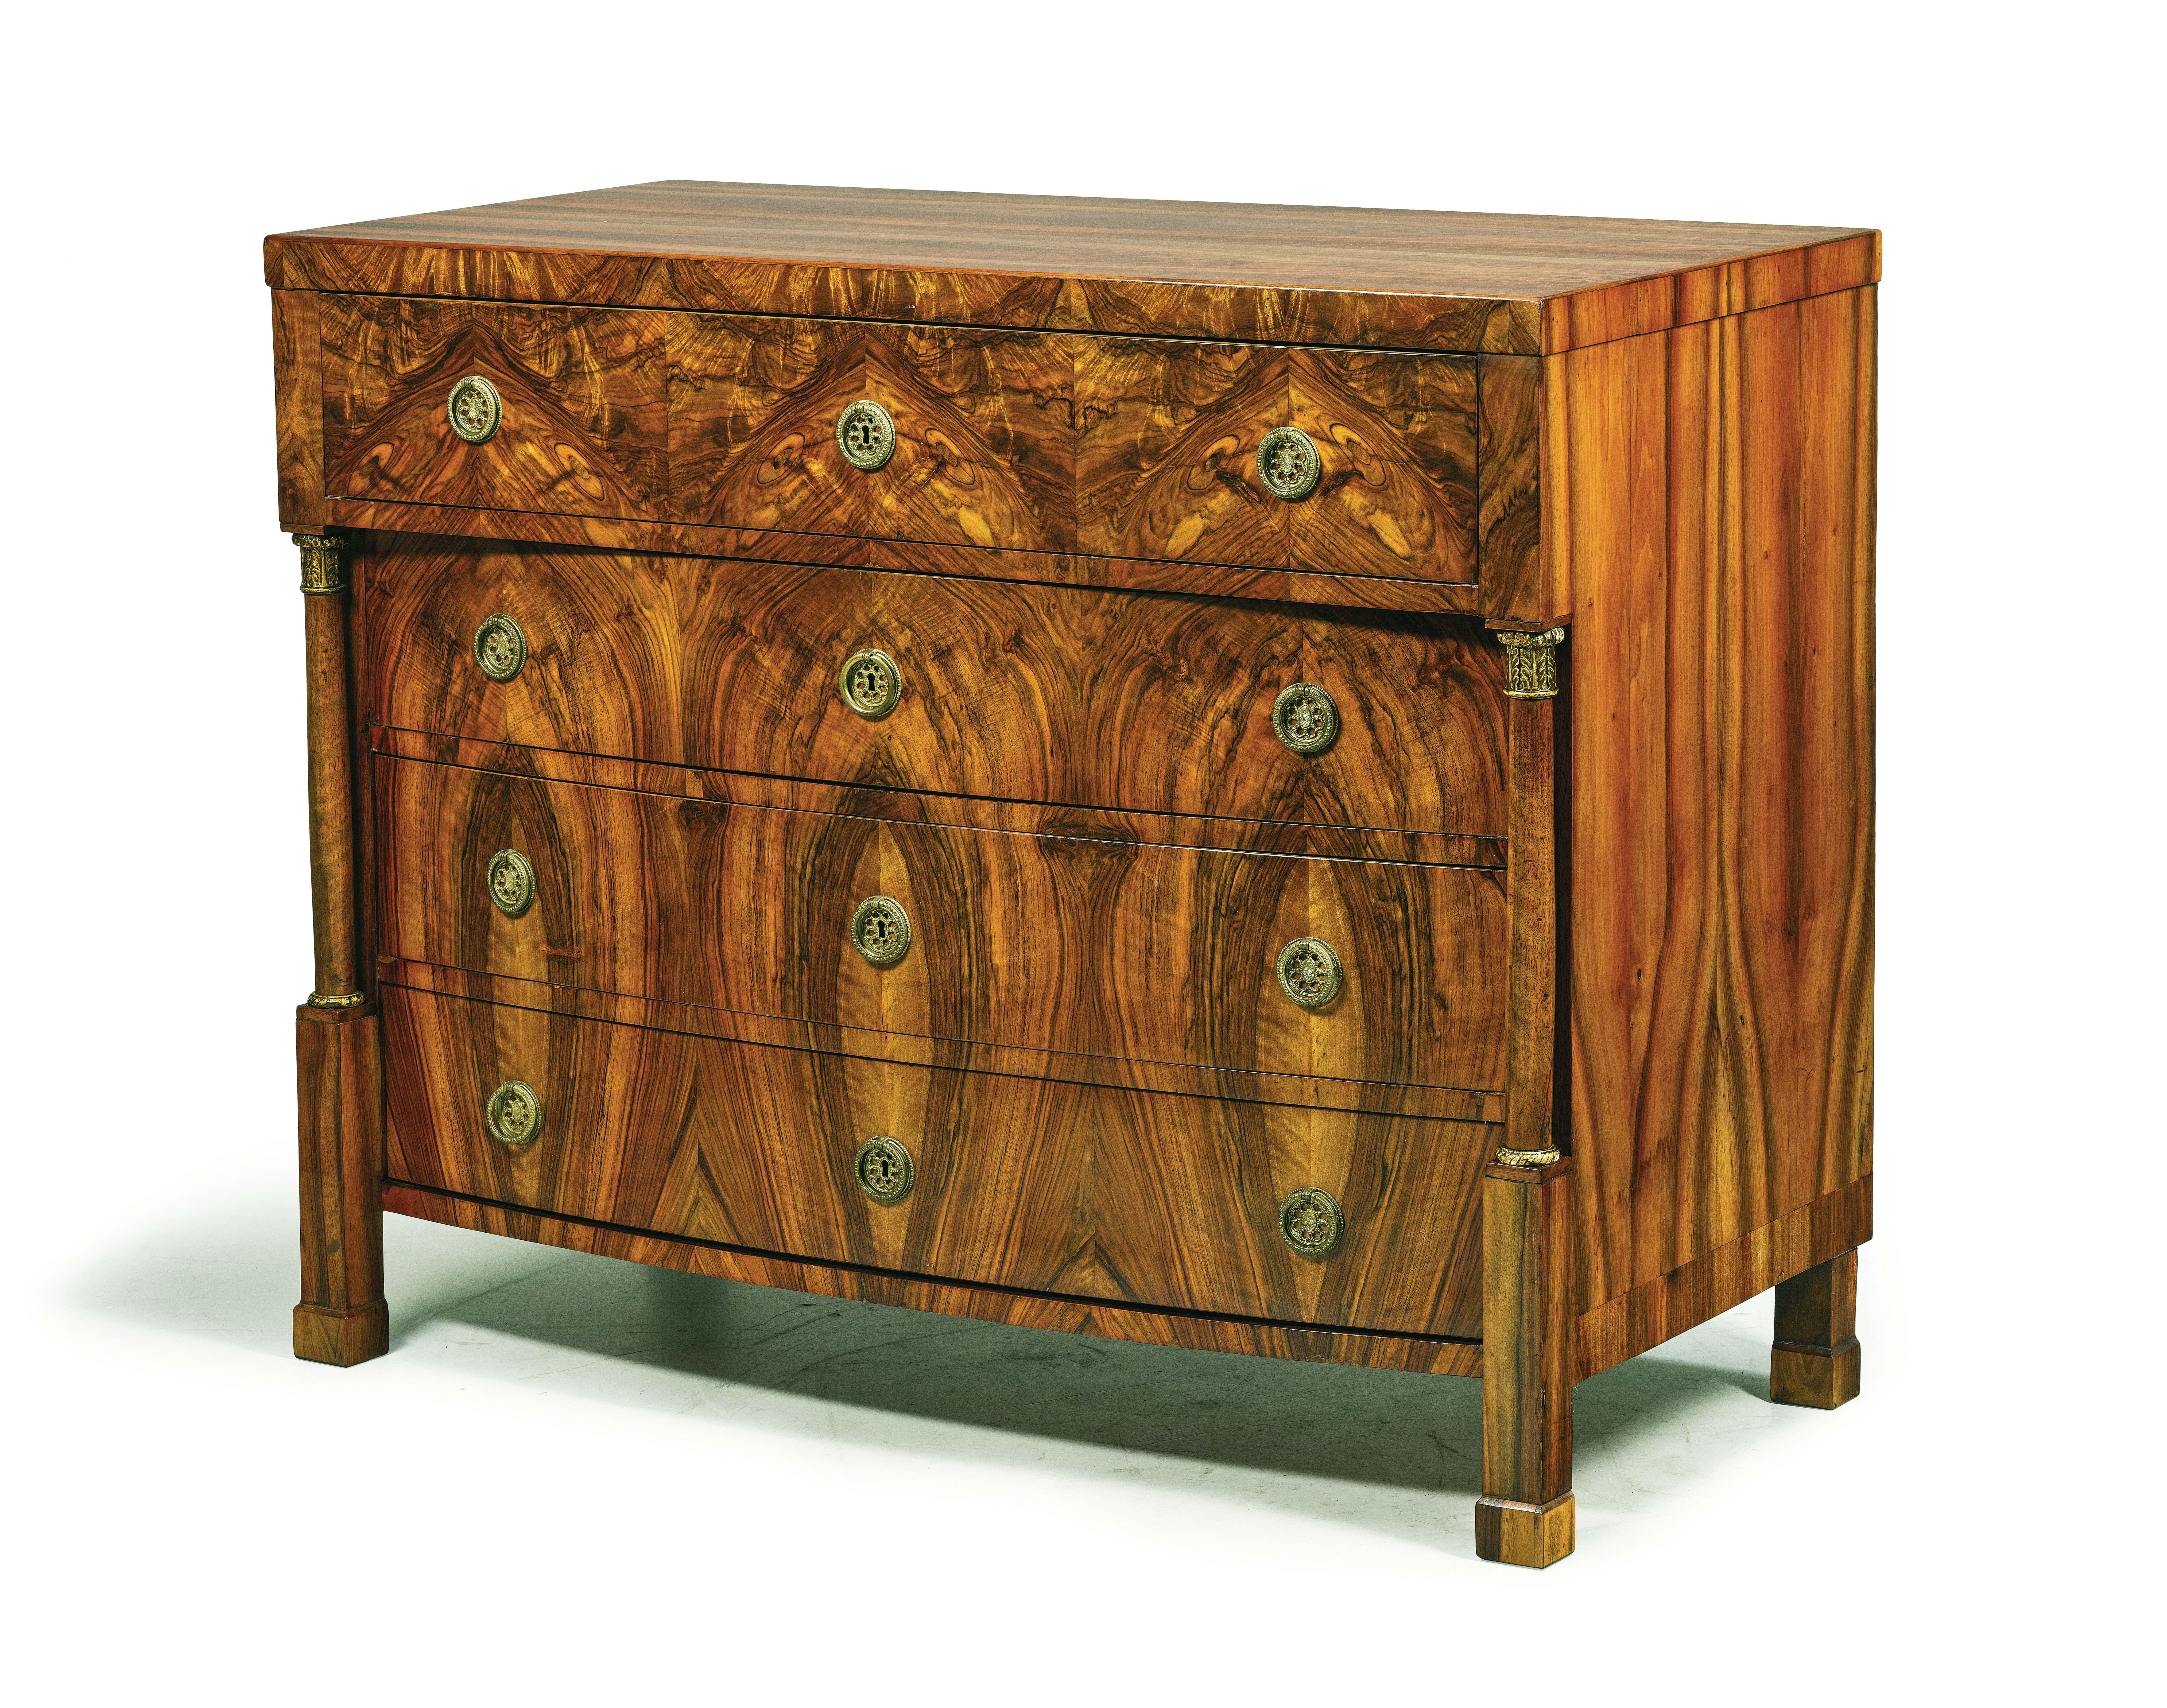 Hello,
We would like to offer you this truly exquisite, early Biedermeier walnut chest of four drawers. The piece was made in Vienna circa 1825.

Viennese Biedermeier is distinguished by their sophisticated proportions, rare and refined design and